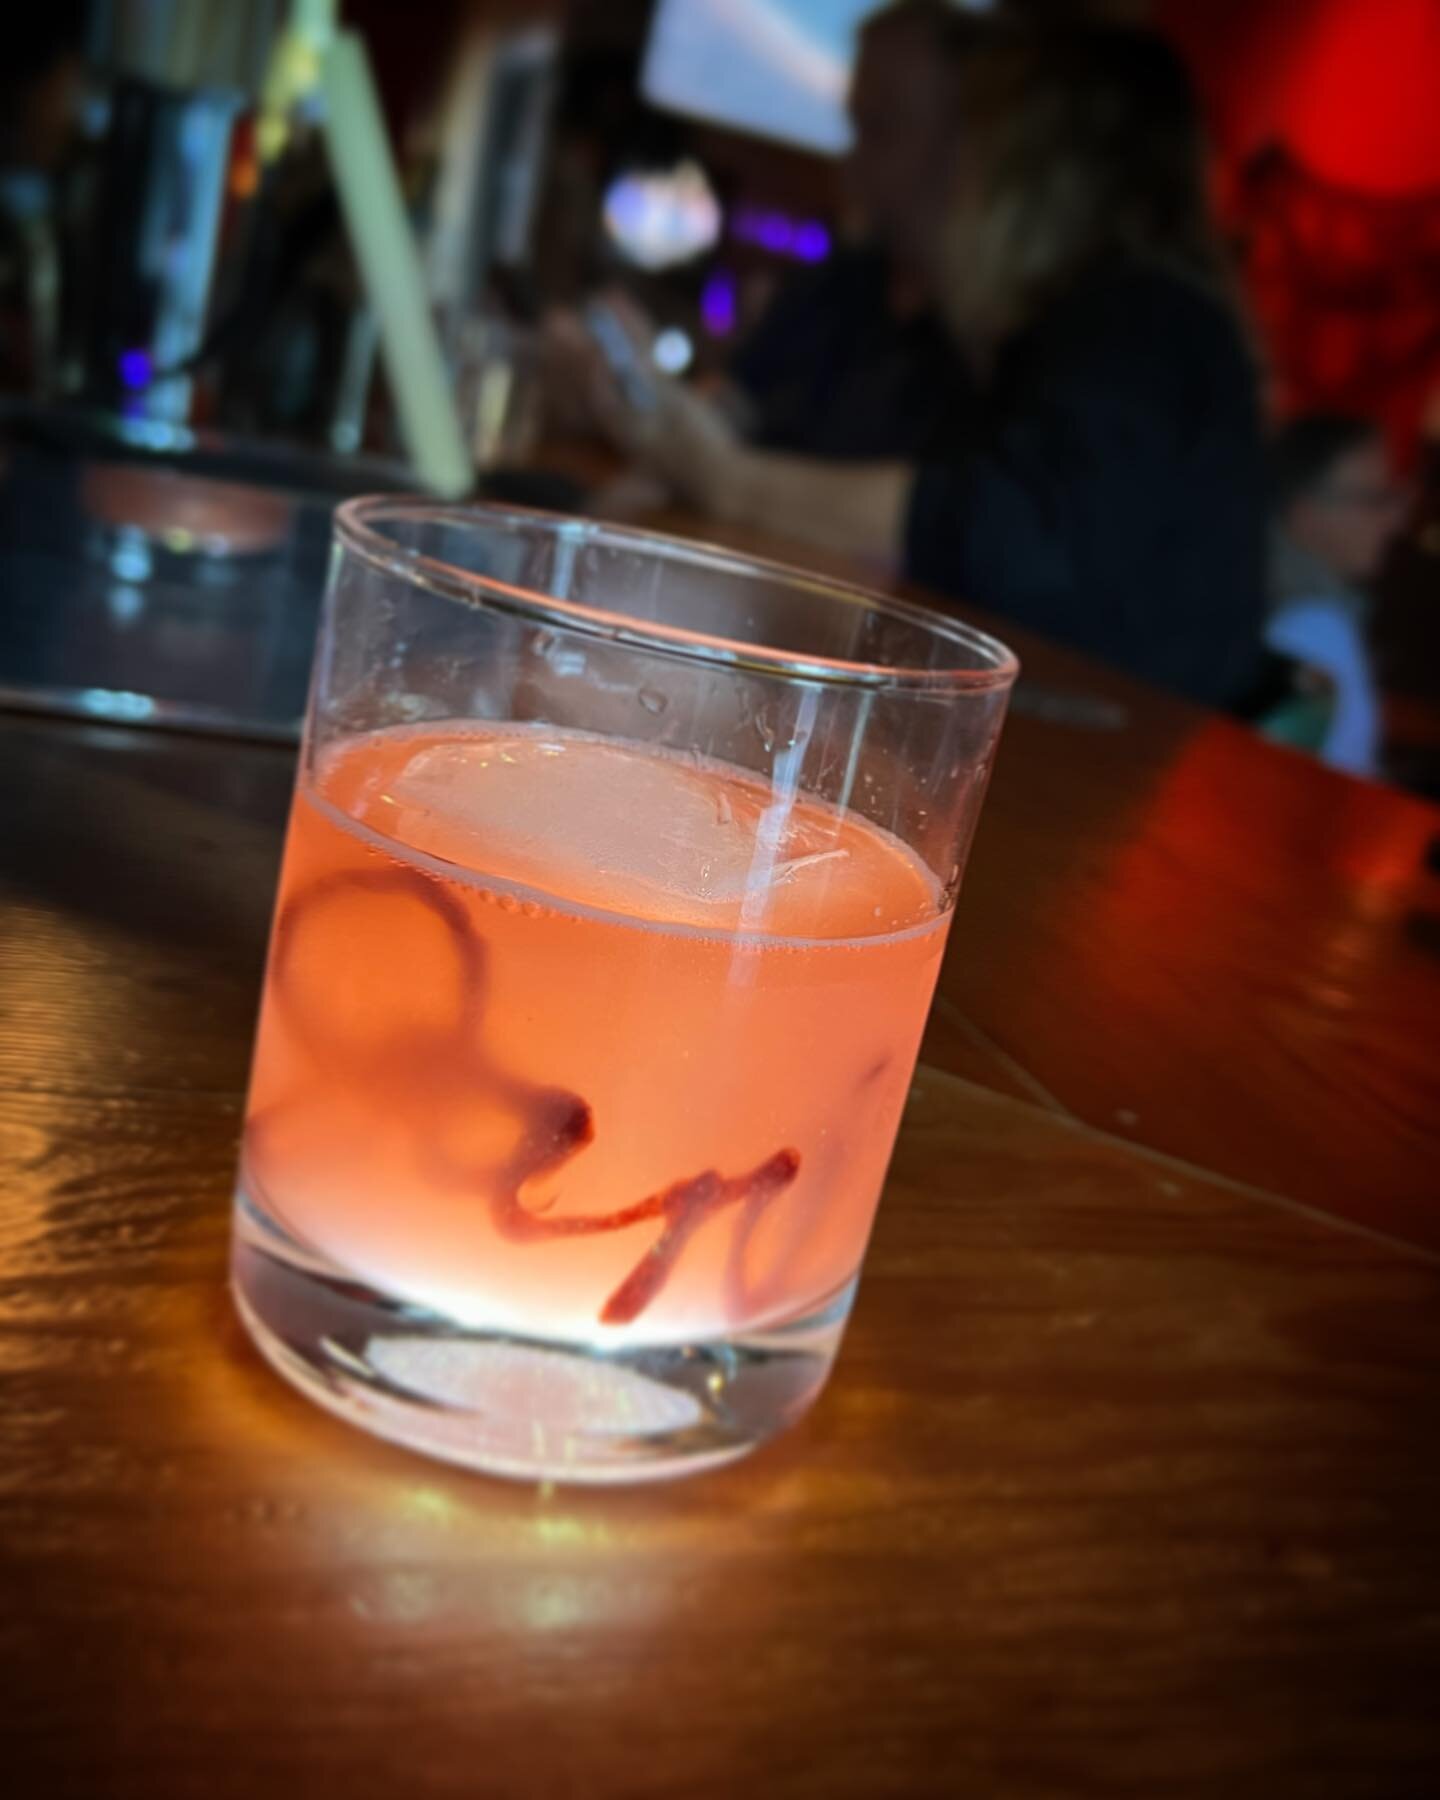 &ldquo;Dammit Janet!&rdquo; You&rsquo;re a &hellip; a sweetheart of a gal.. with ROXOR Artisan gin, plum, citrus and licor 43 she&rsquo;s a keeper. #putaeingonit  Come visit us for our Rocky Horror Picture Show pop-up until the end of the month.